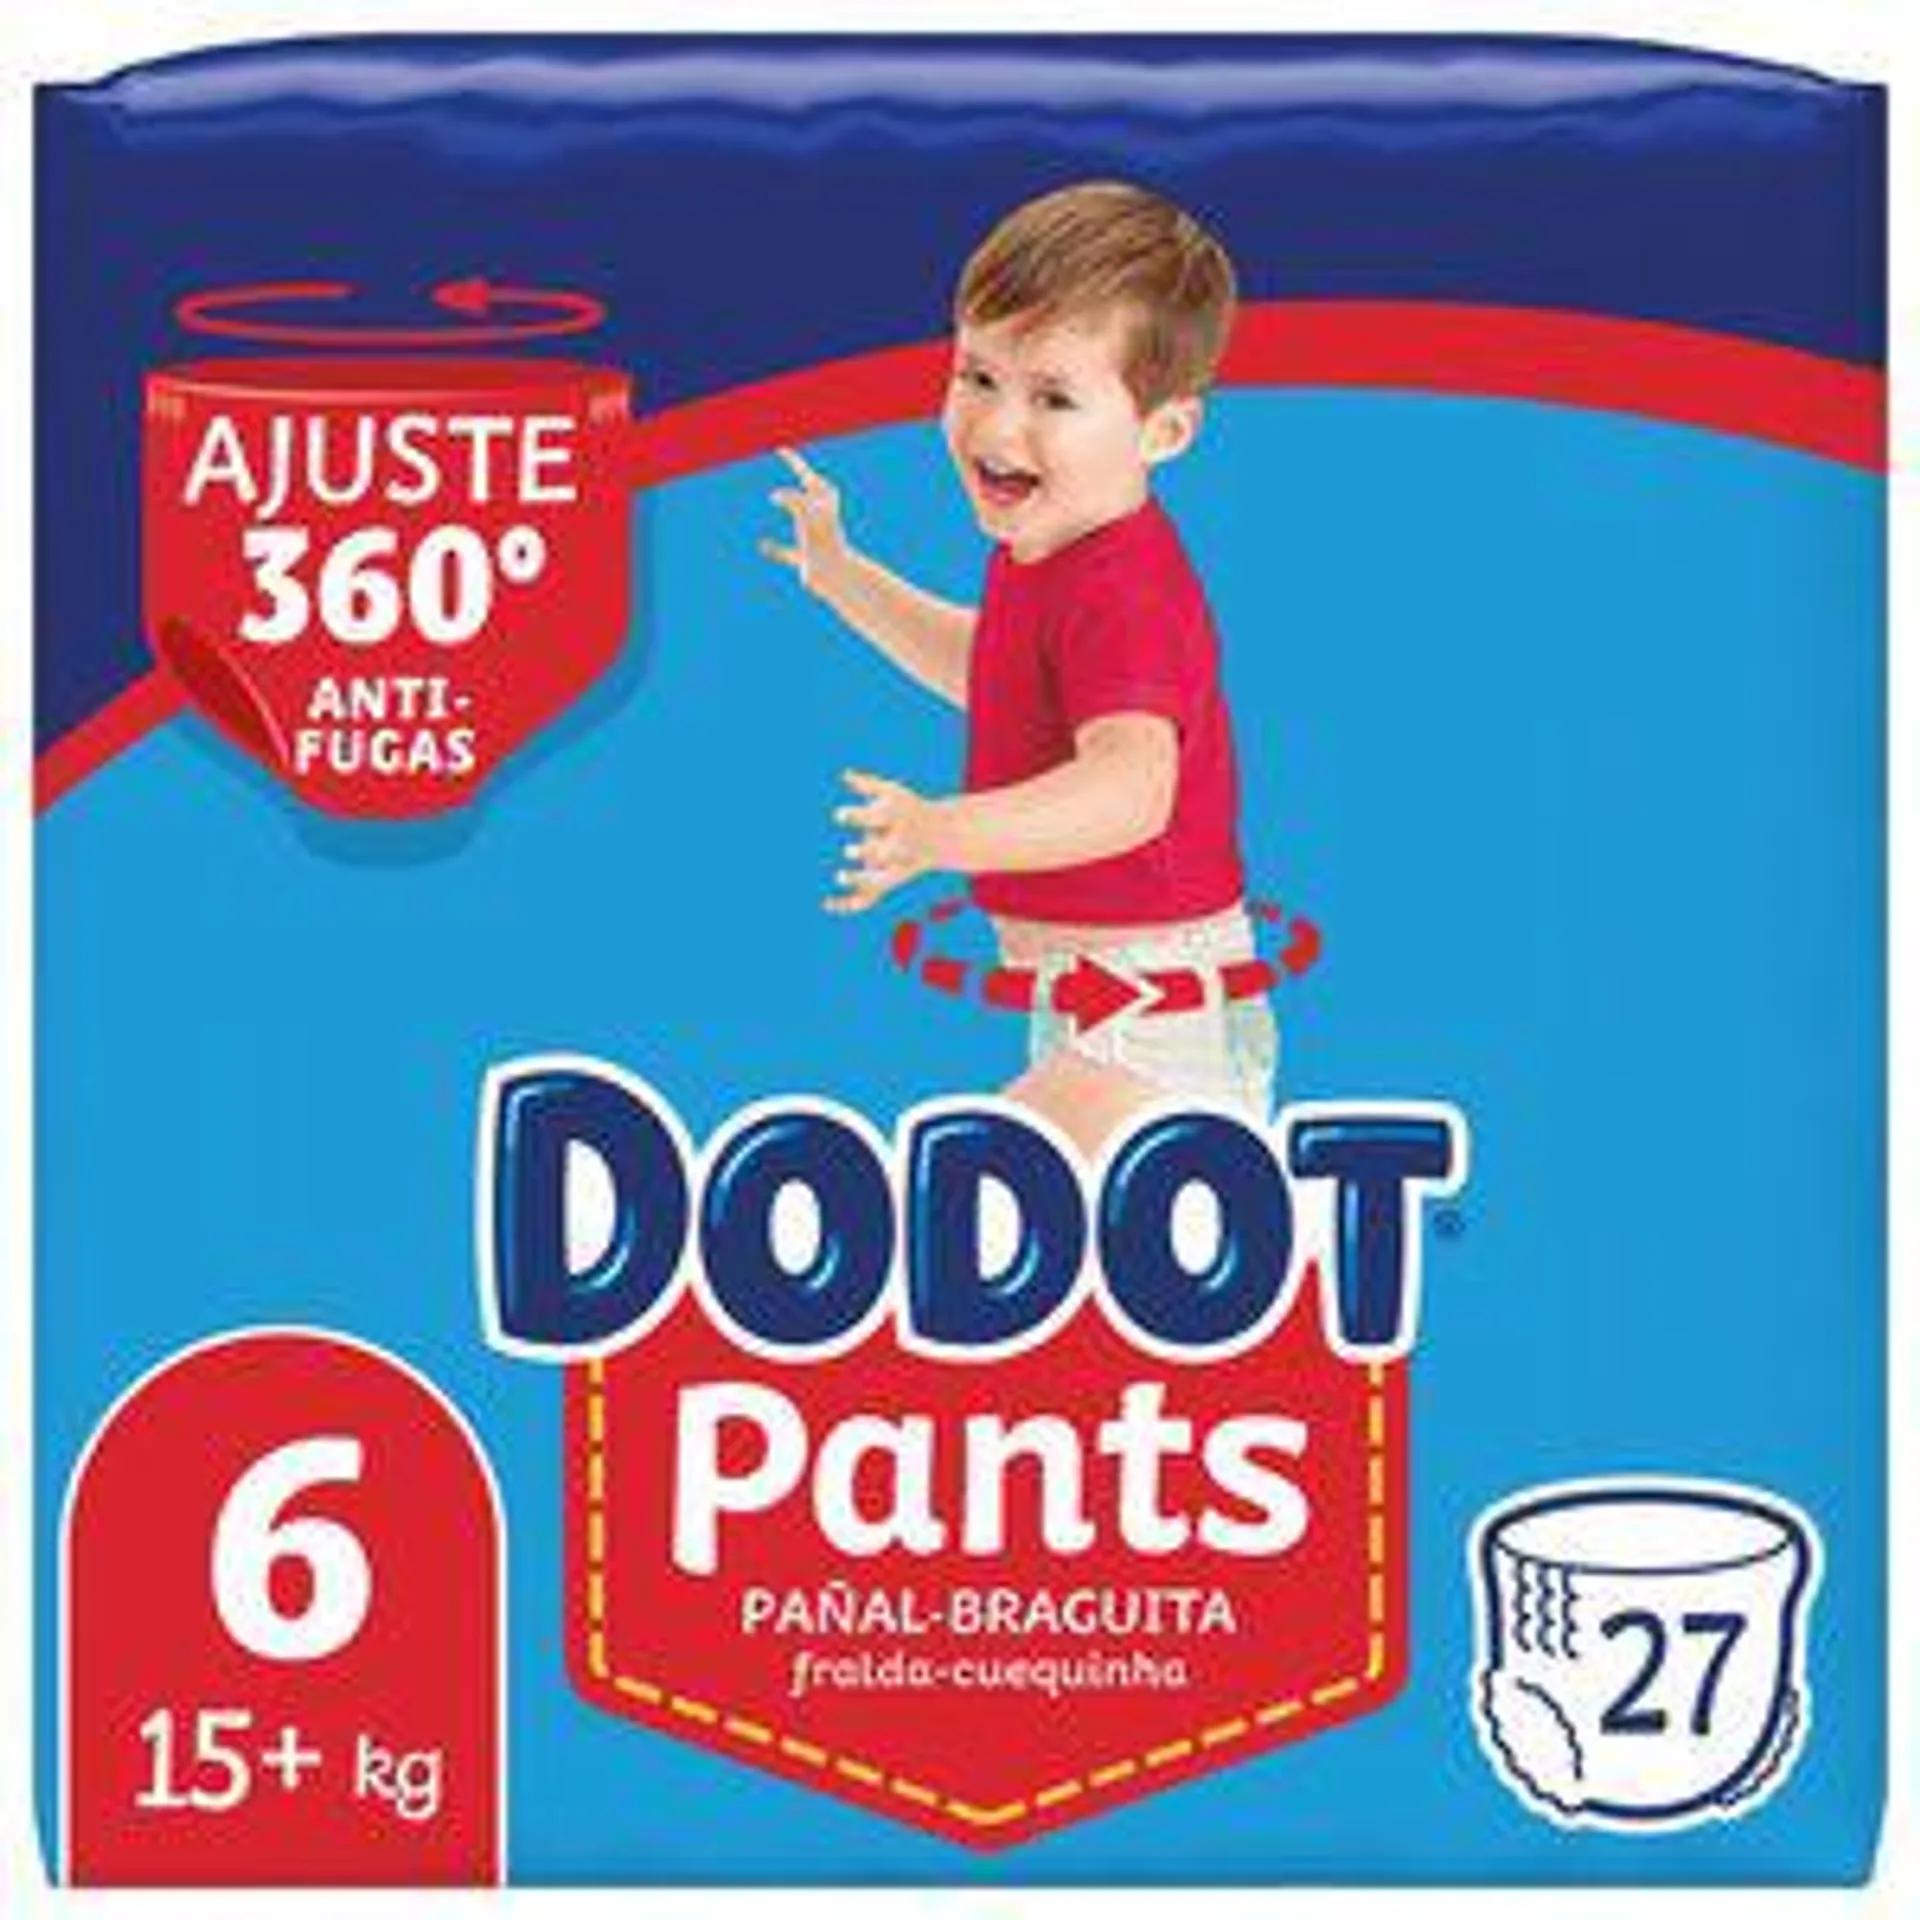 DODOT Pants pañales +15 kg talla 6 paquete 27 uds